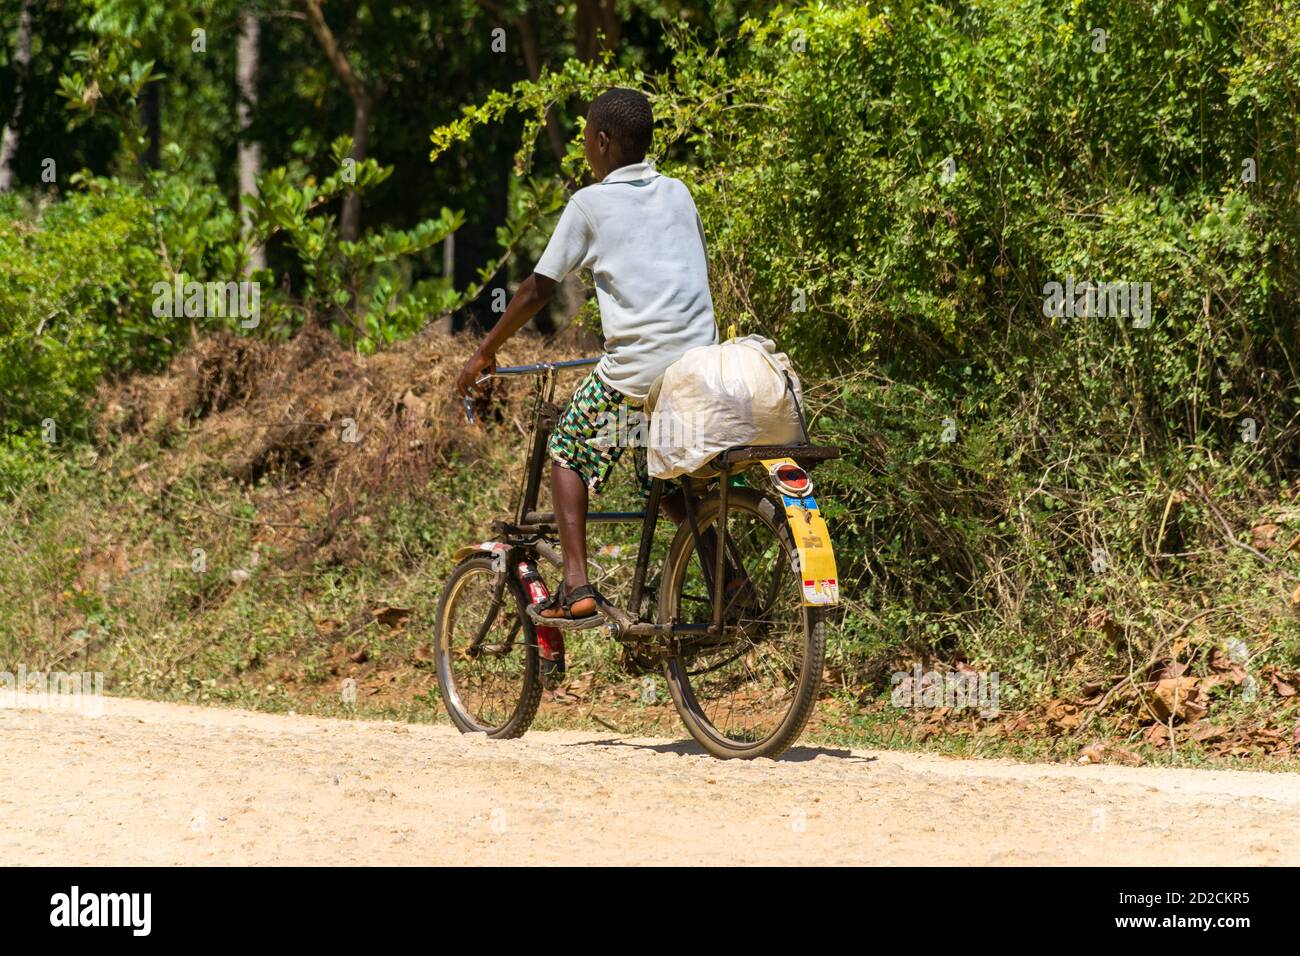 A Kenyan boy riding a bicycle on a dusty road transporting goods on the back, Kenya, East Africa Stock Photo